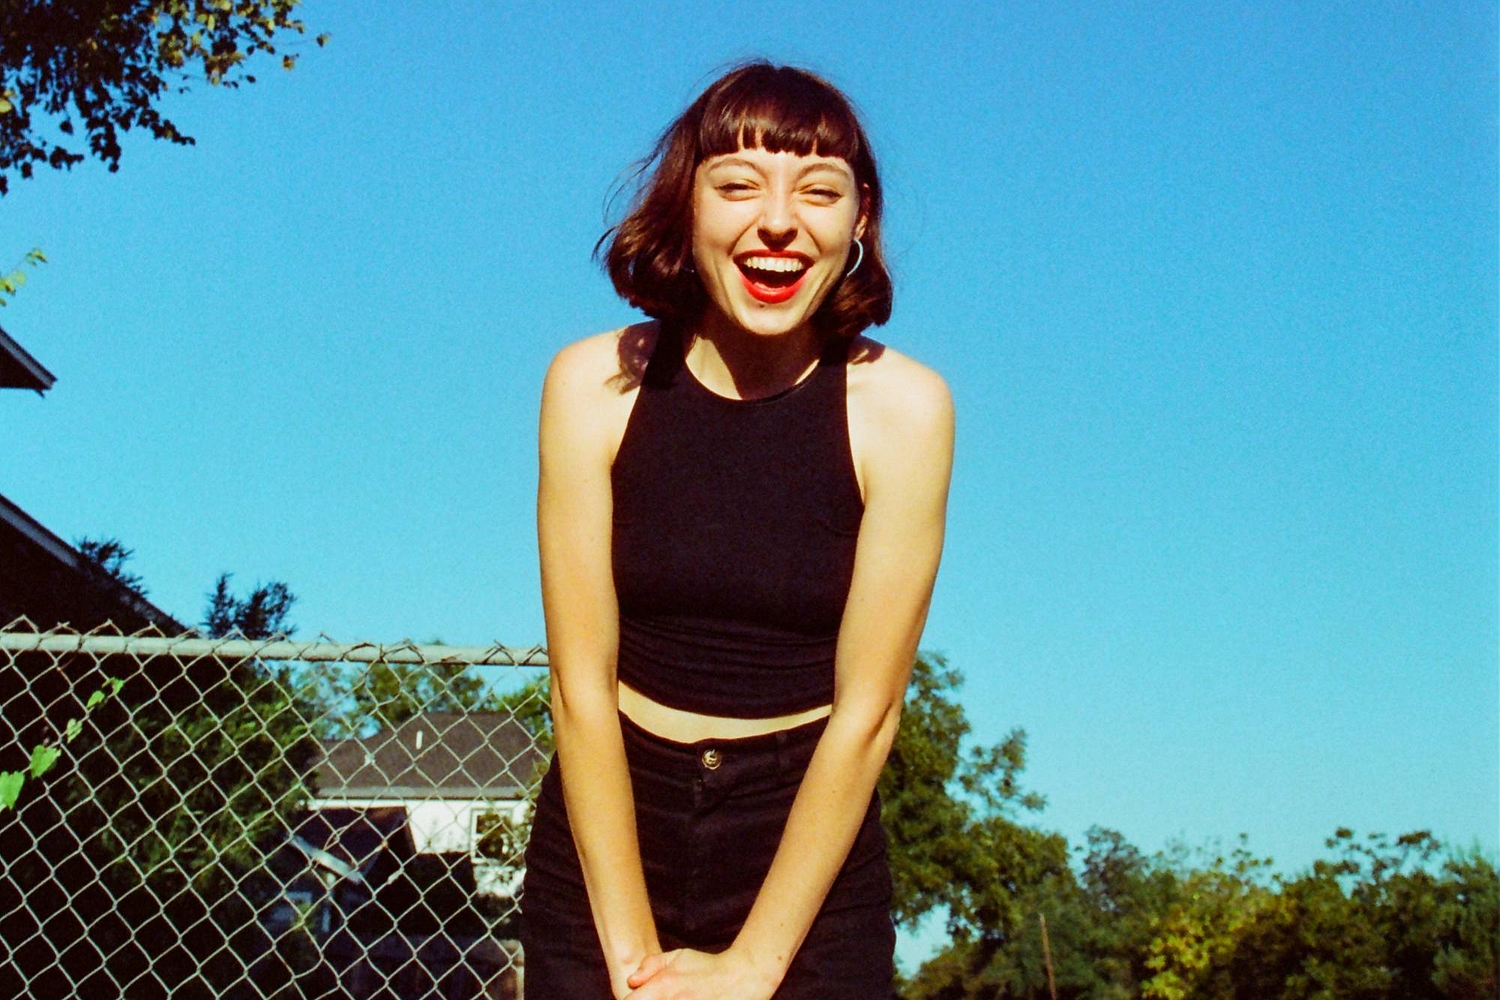 Stella Donnelly has a chaotic Christmas party in 'Season's Greetings' visuals